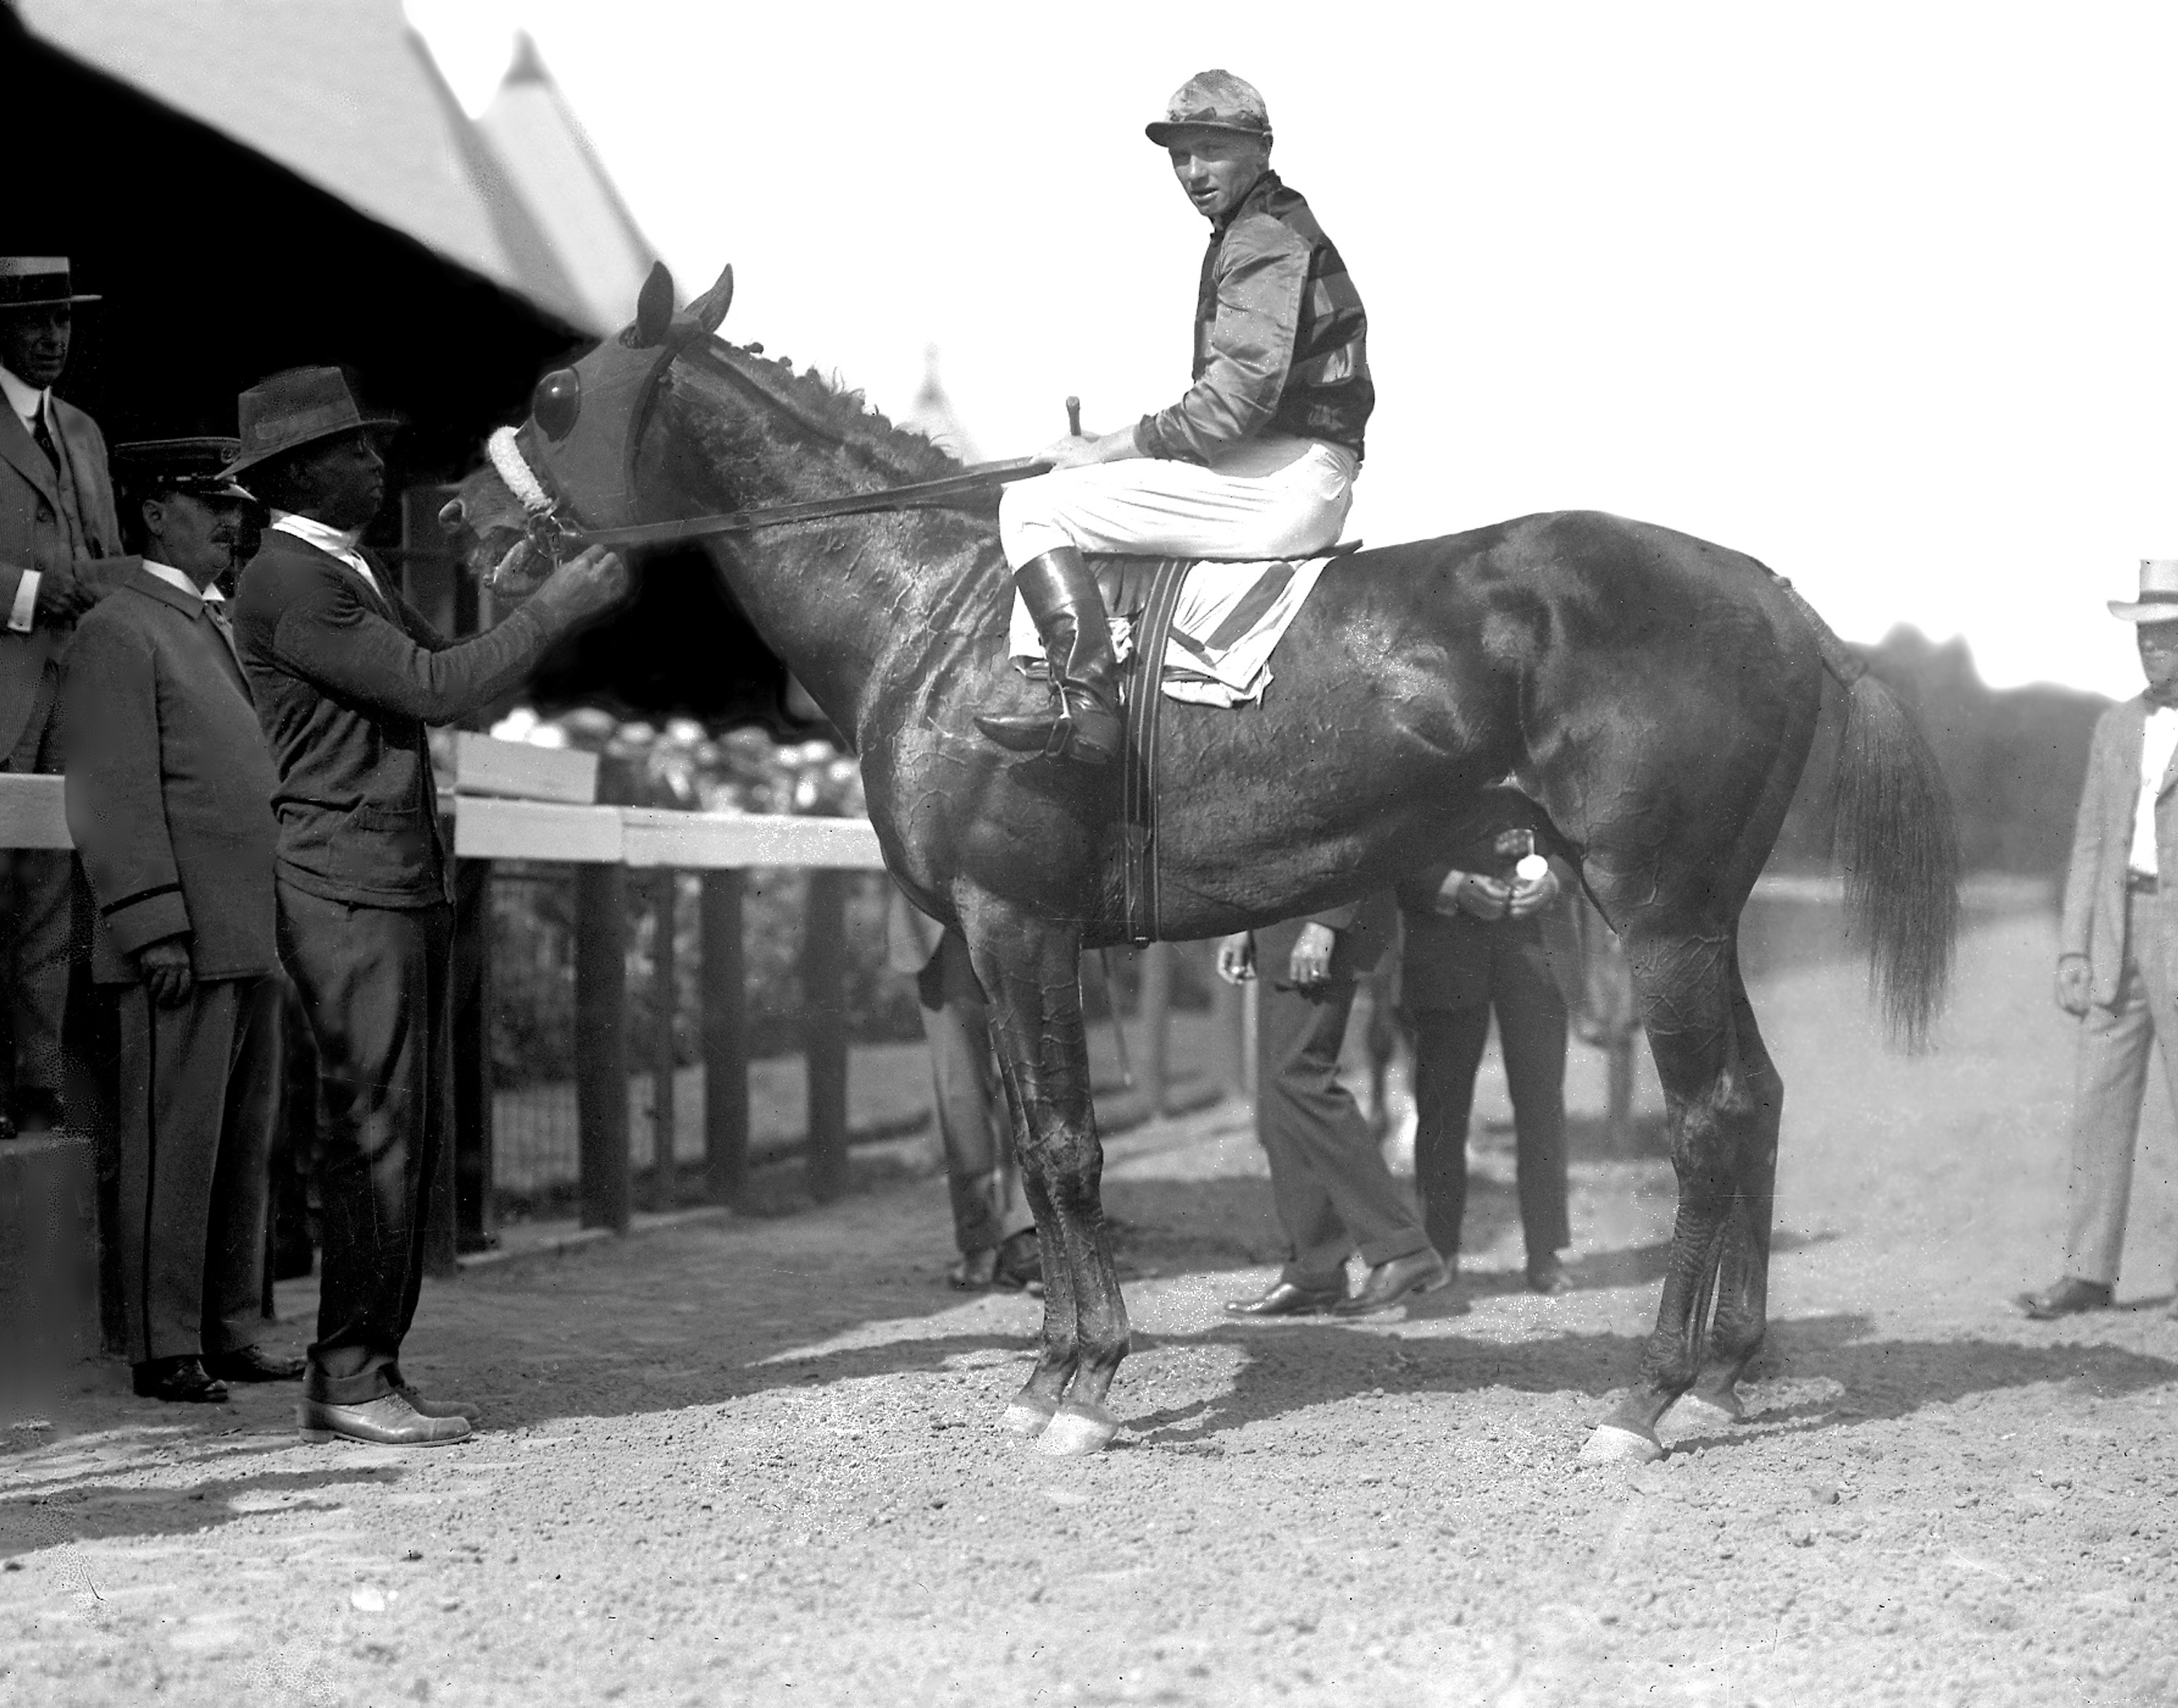 Keeneland Library Cook Collection - 3422 - Earl Sande on Sir Barton, undated